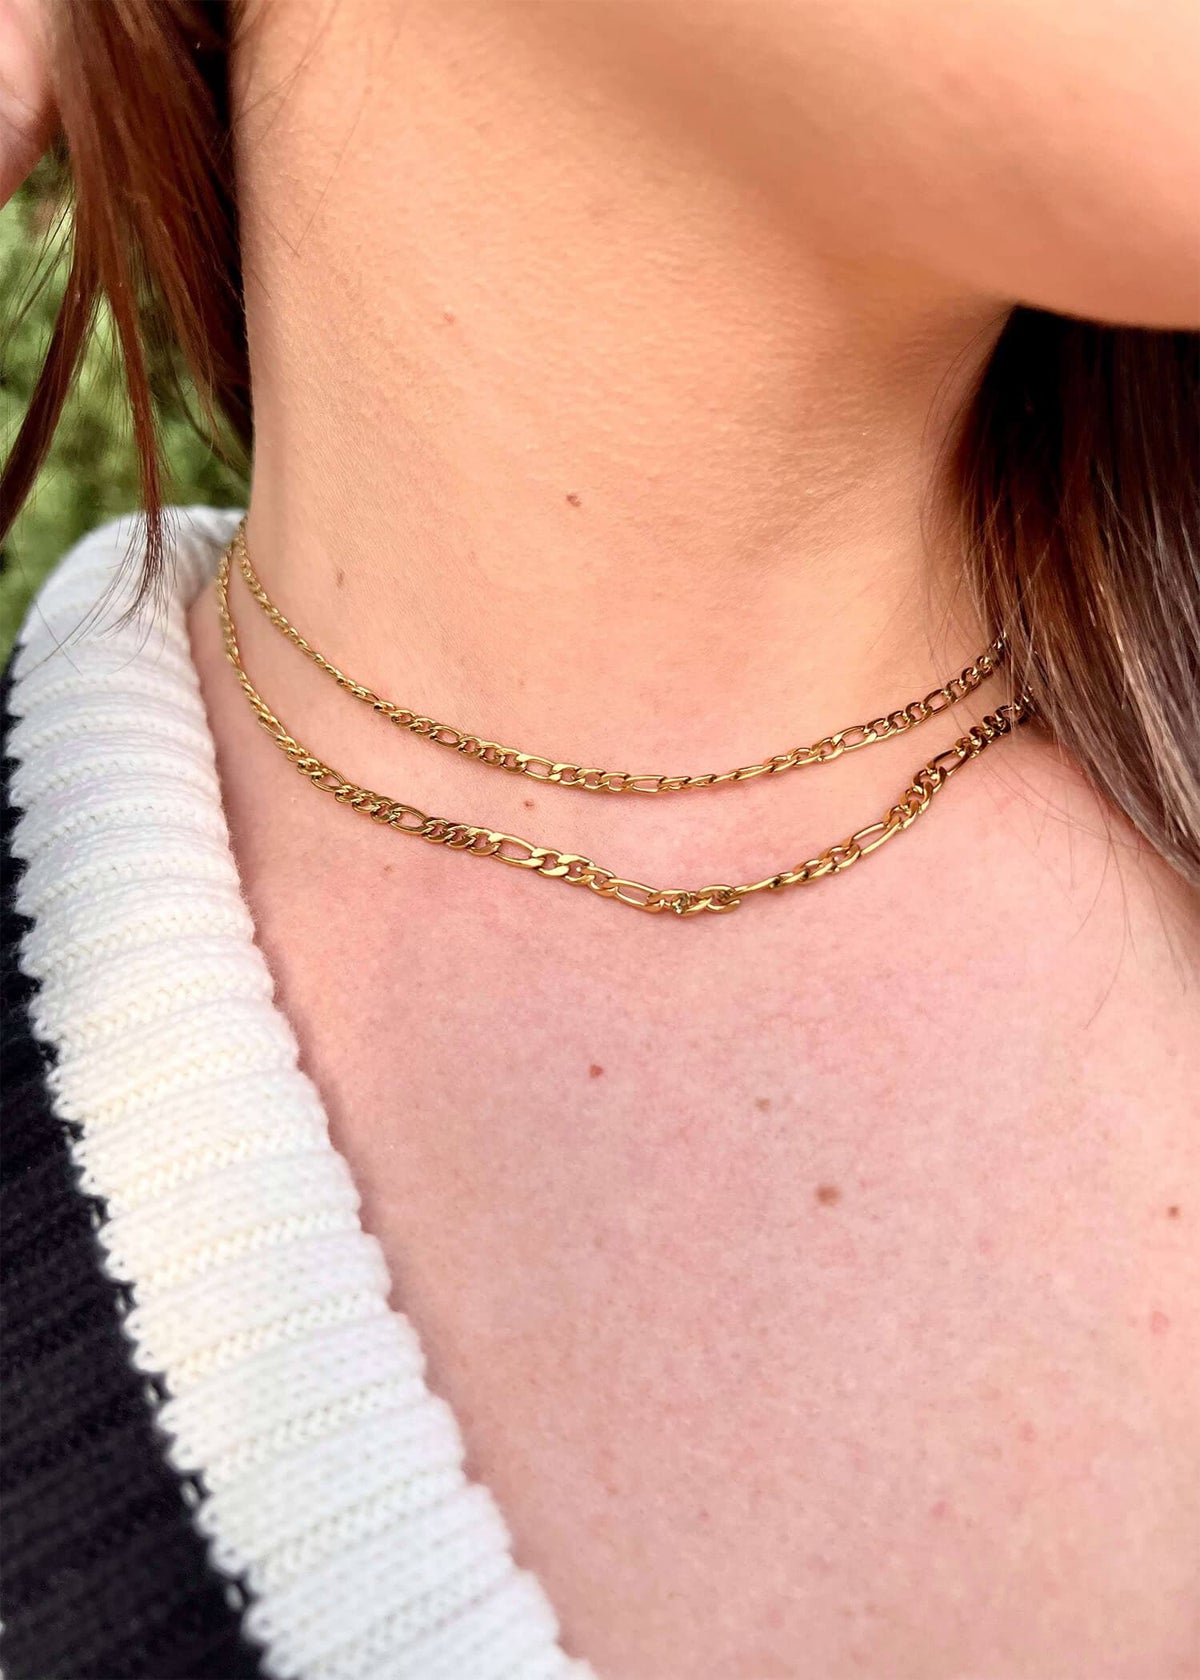 If You Say So Necklace - Gold Necklace MerciGrace Boutique.